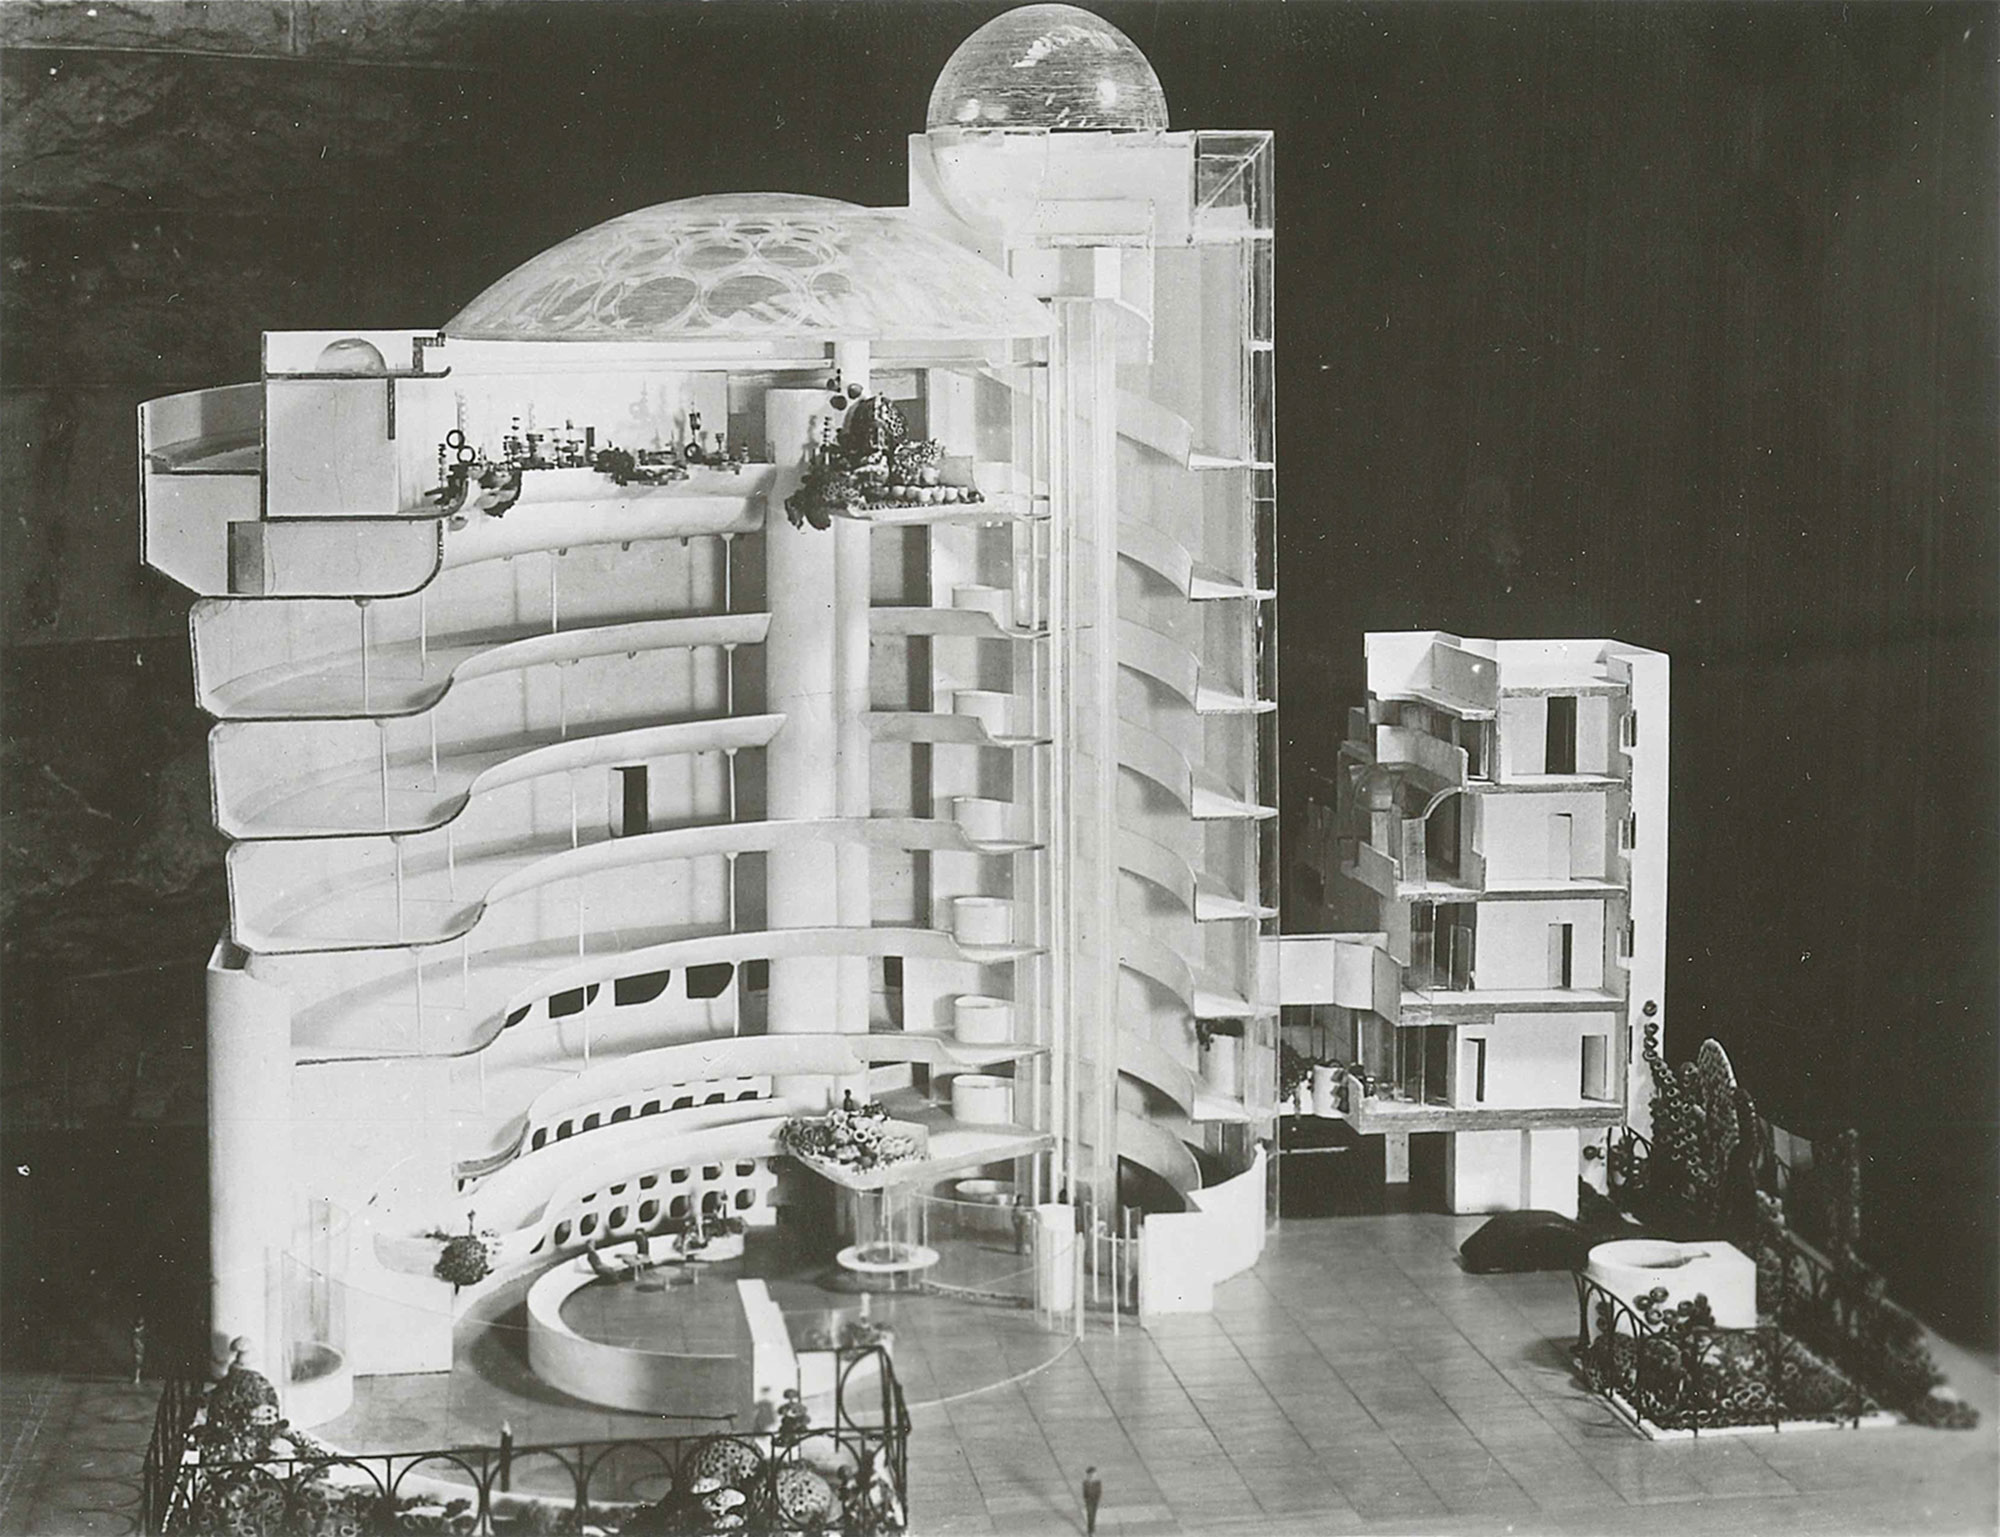 The model was developed and adapted over time. This image from December 1946 shows thin steel columns built in along the inner edge of the main gallery’s spiral. Solomon R. Guggenheim Museum Archives, New York, NY. Copyright © 2017 Frank Lloyd Wright Foundation, Scottsdale, AZ. All rights reserved. 